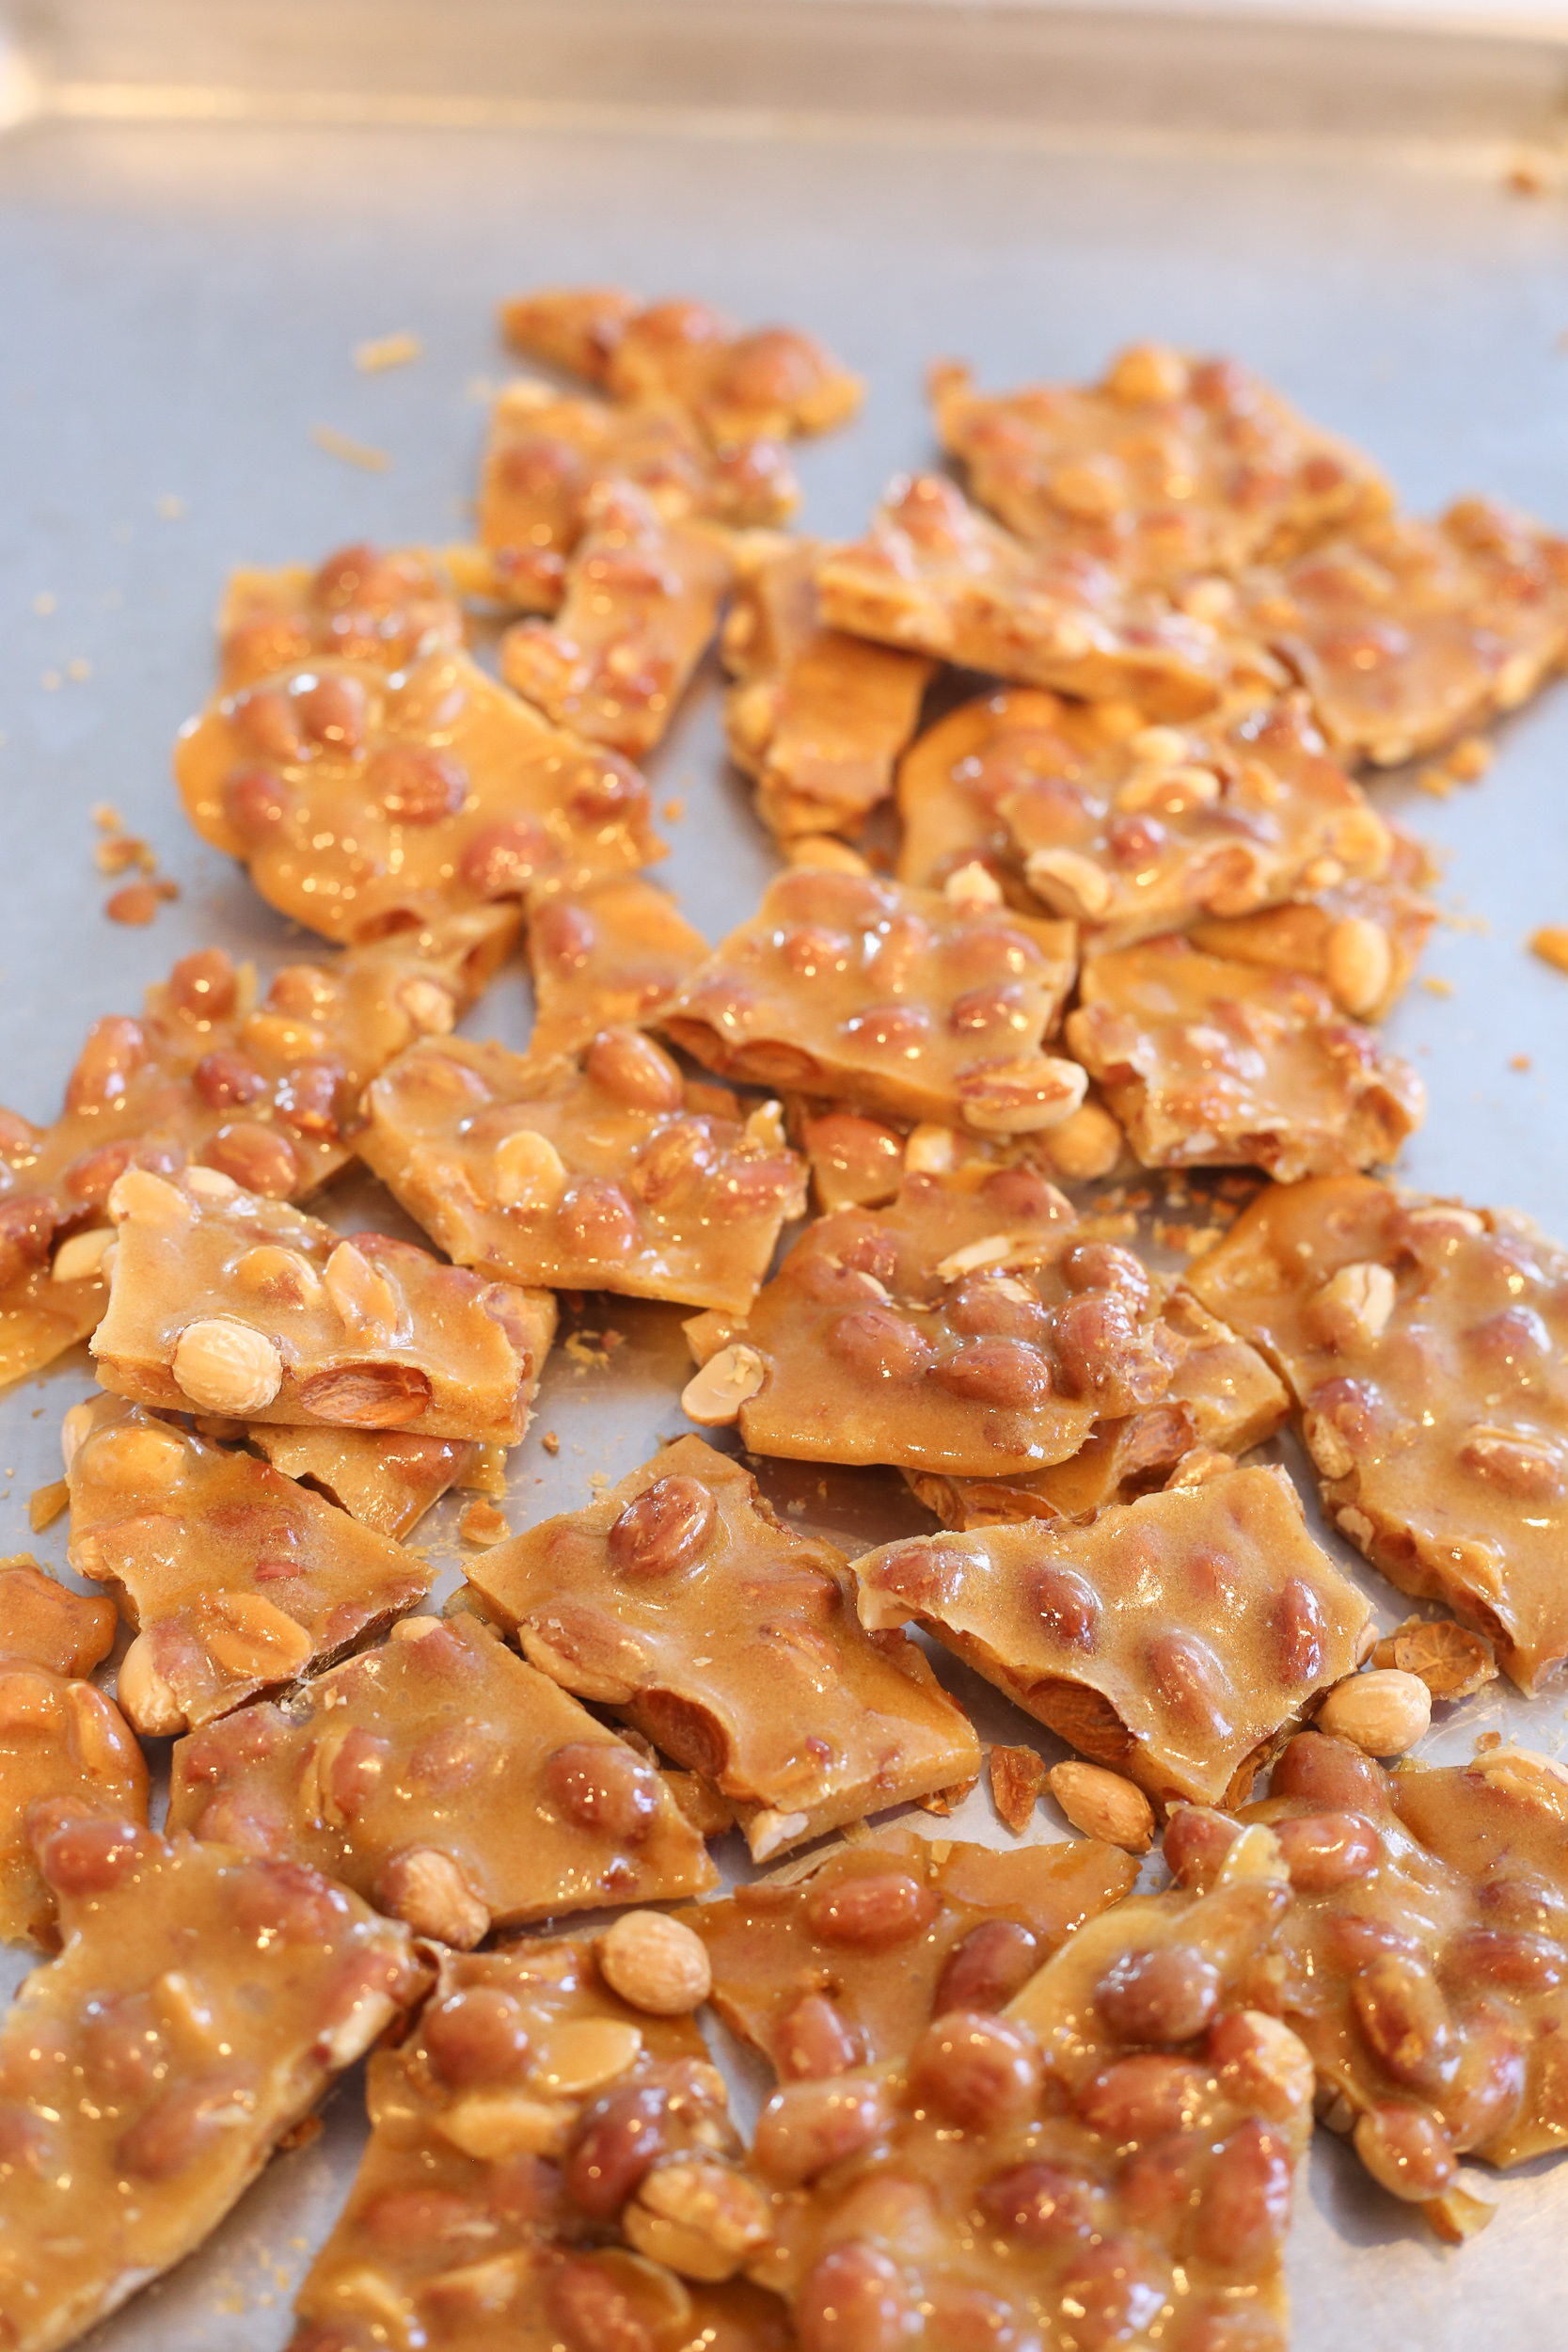 Easy Homemade Peanut Brittle - Our Favorite Christmas Treat - The ...